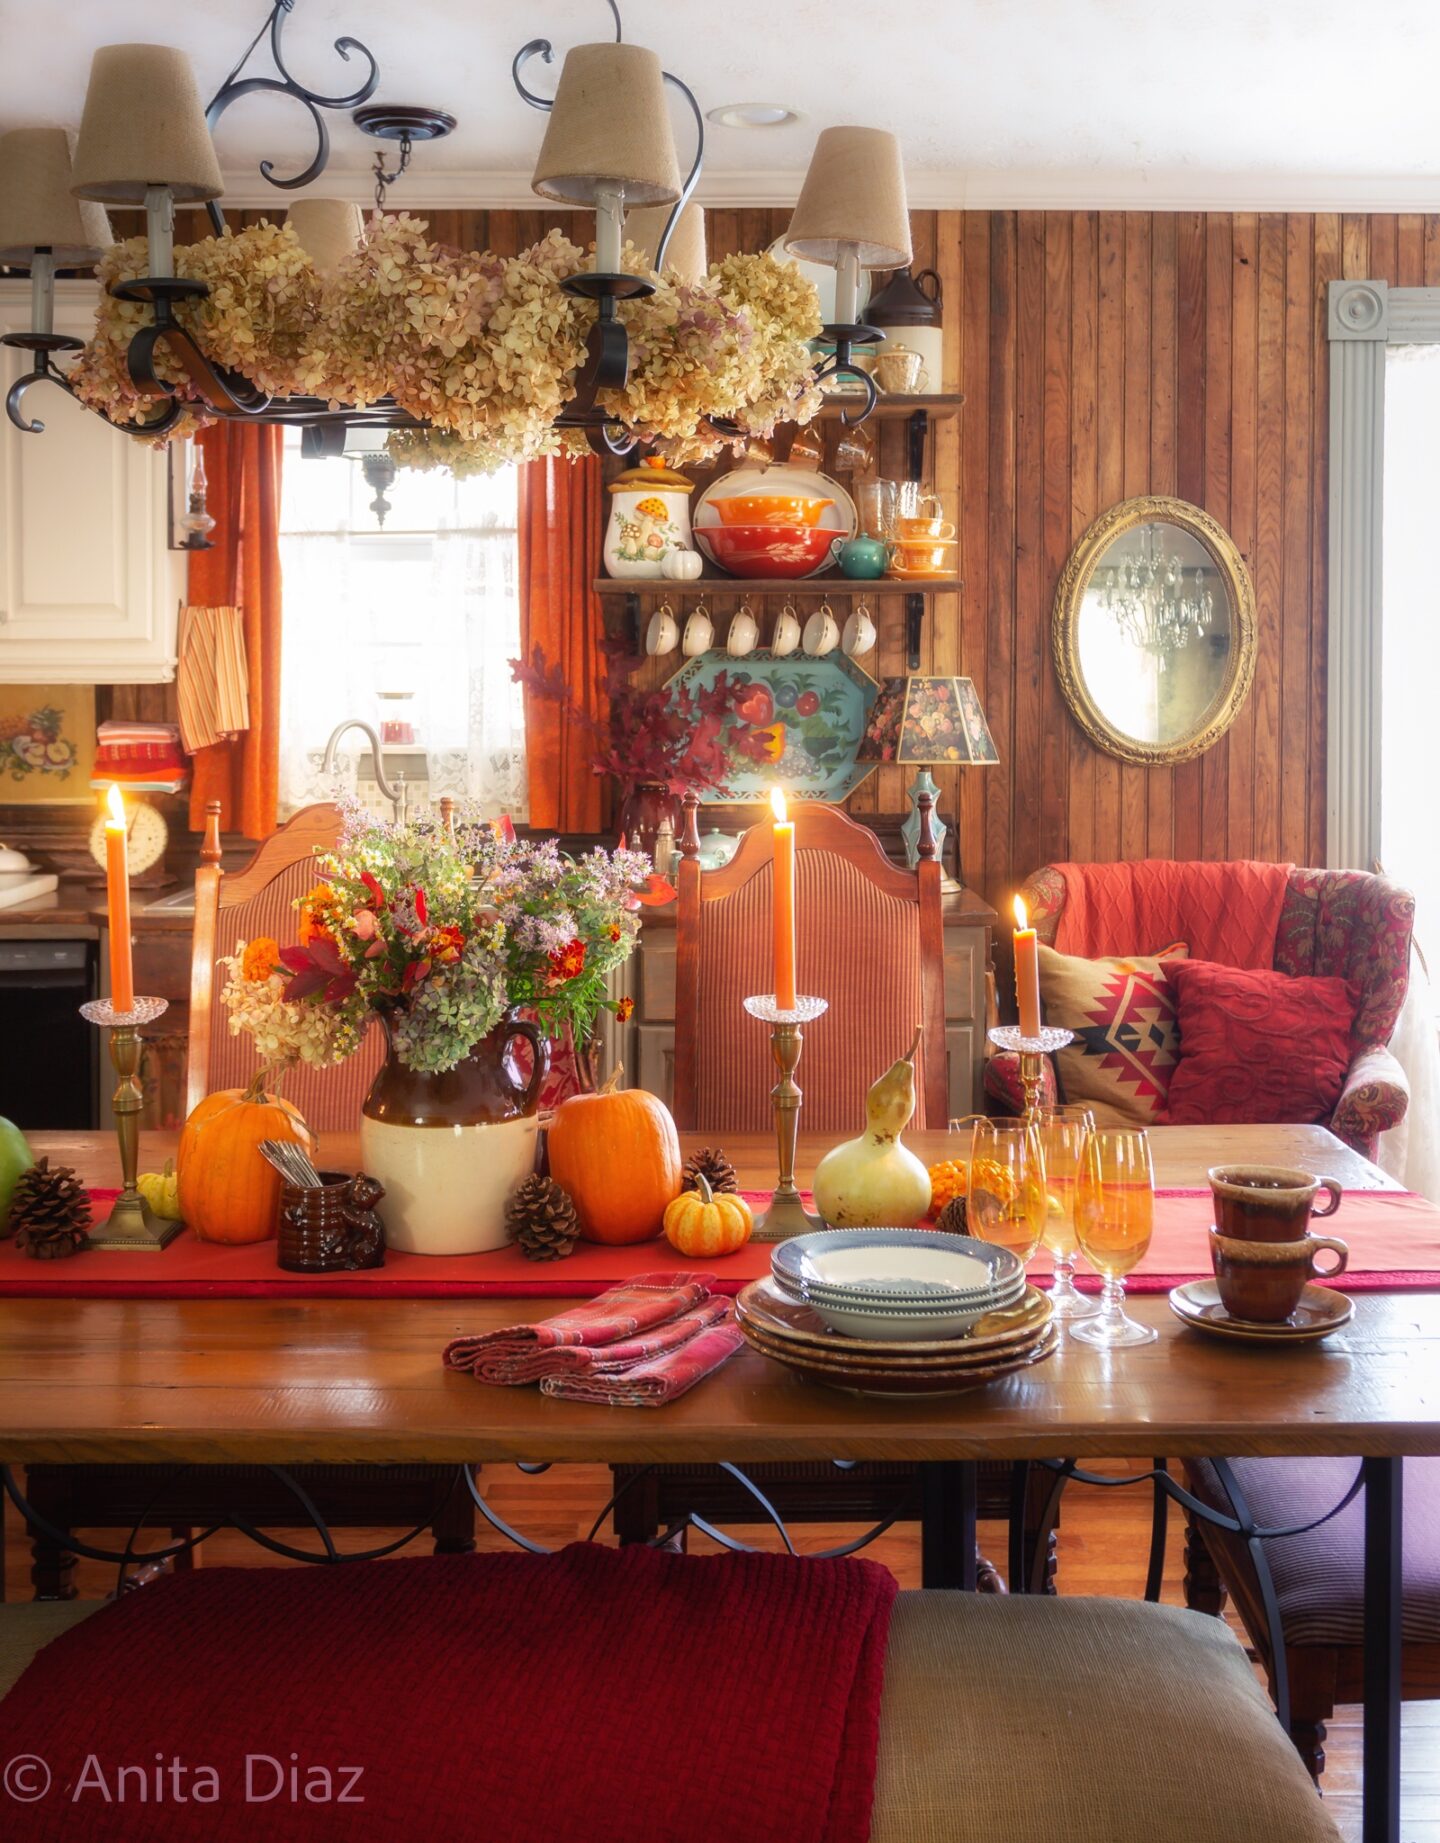 Vintage Home Design Ideas to Steal From Your Grandma's Decor